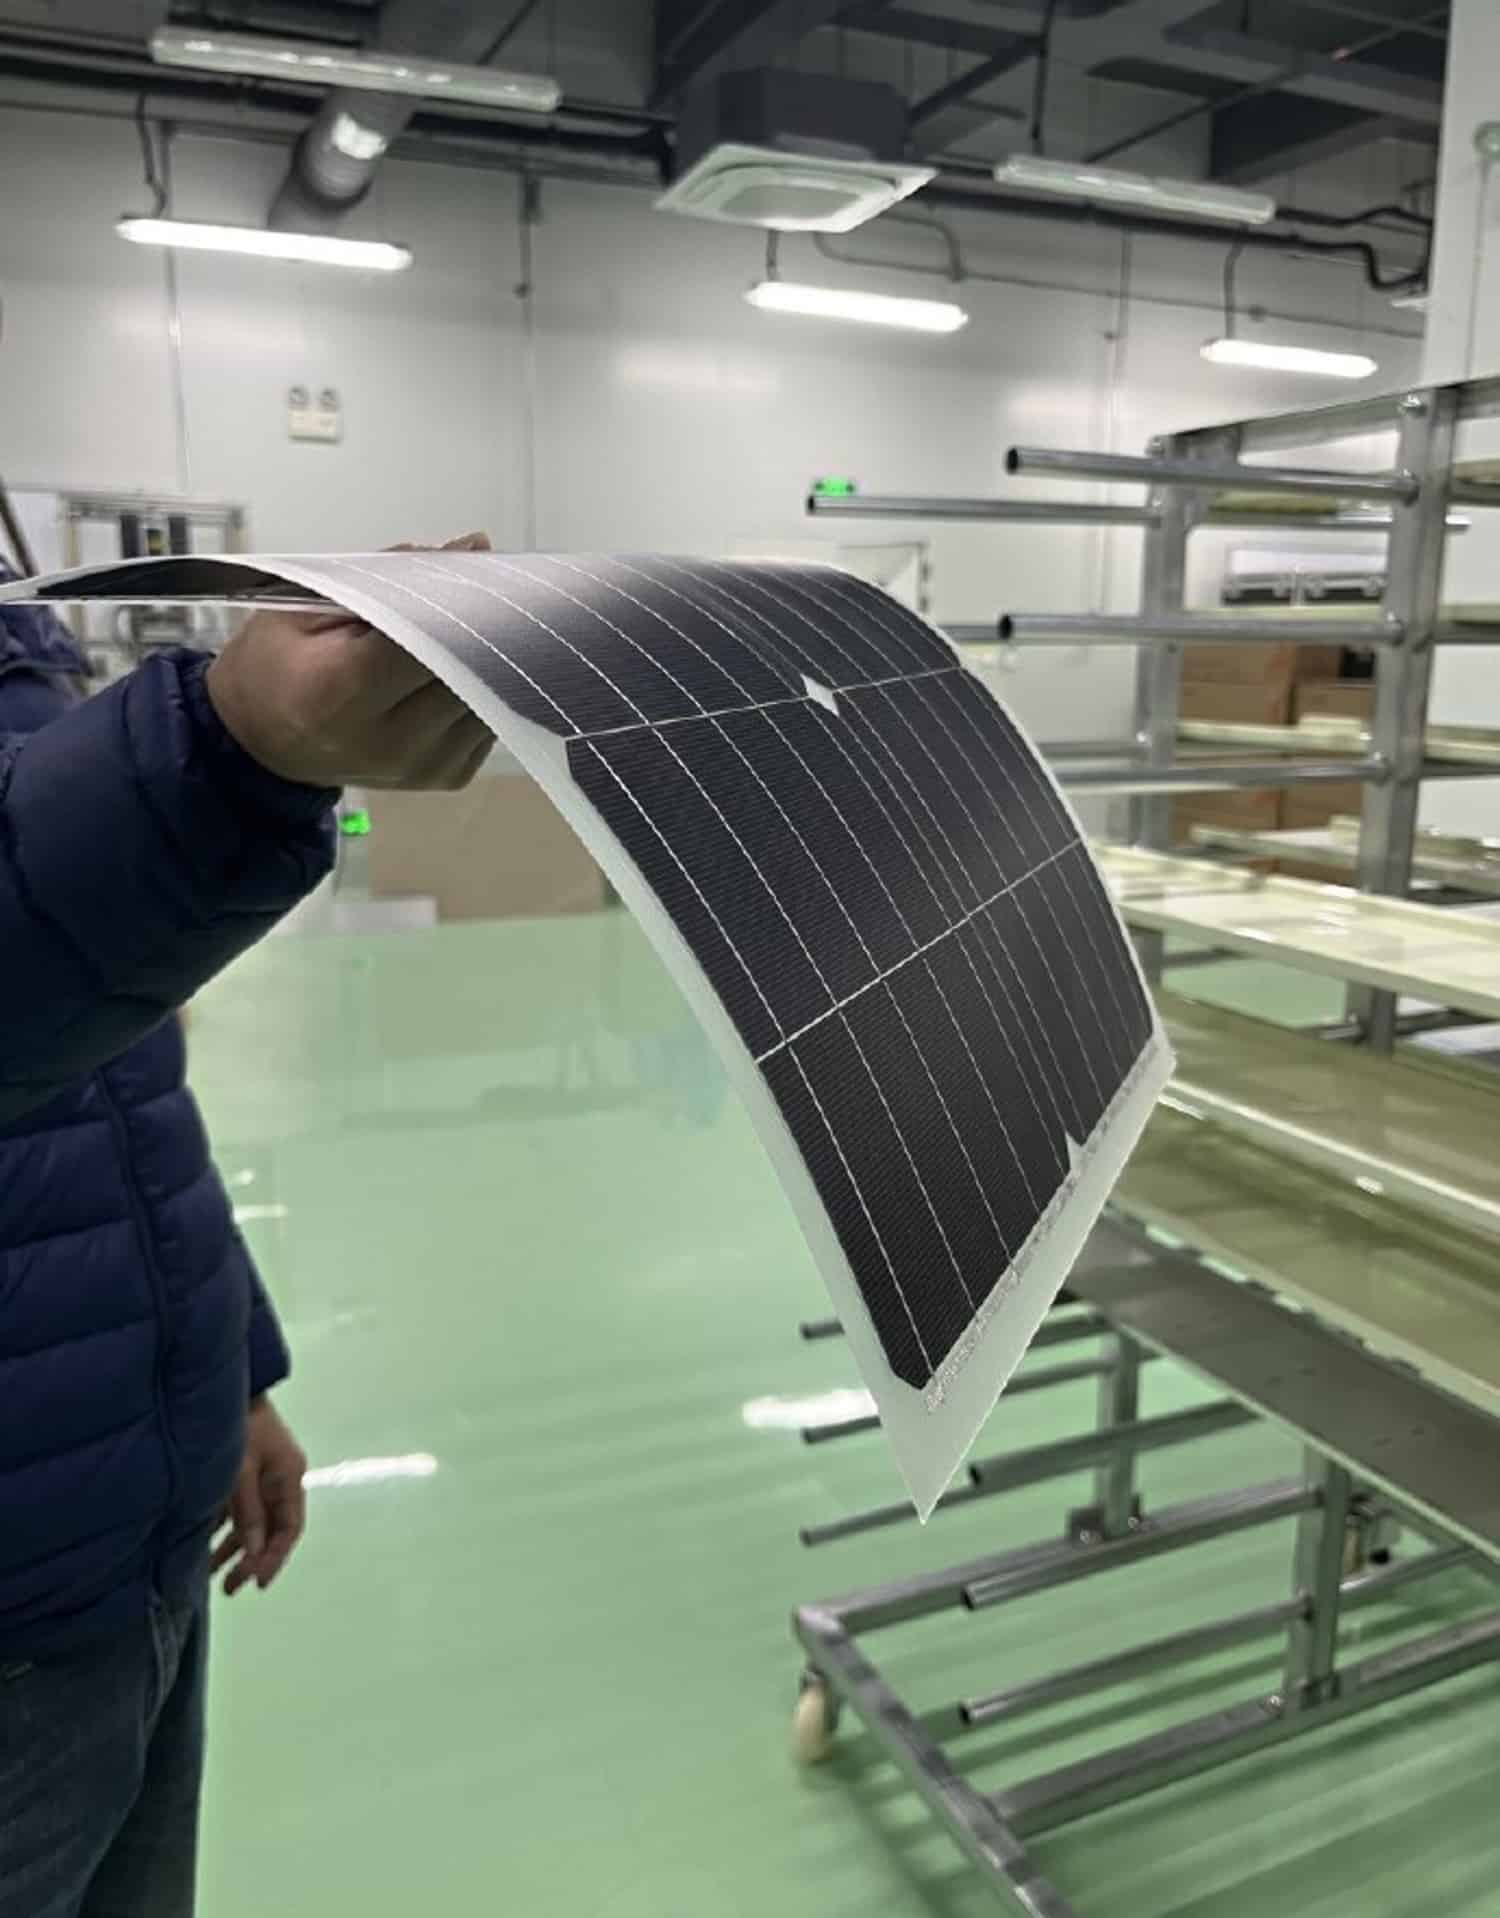 Bendable silicon solar panels make solar everywhere possible